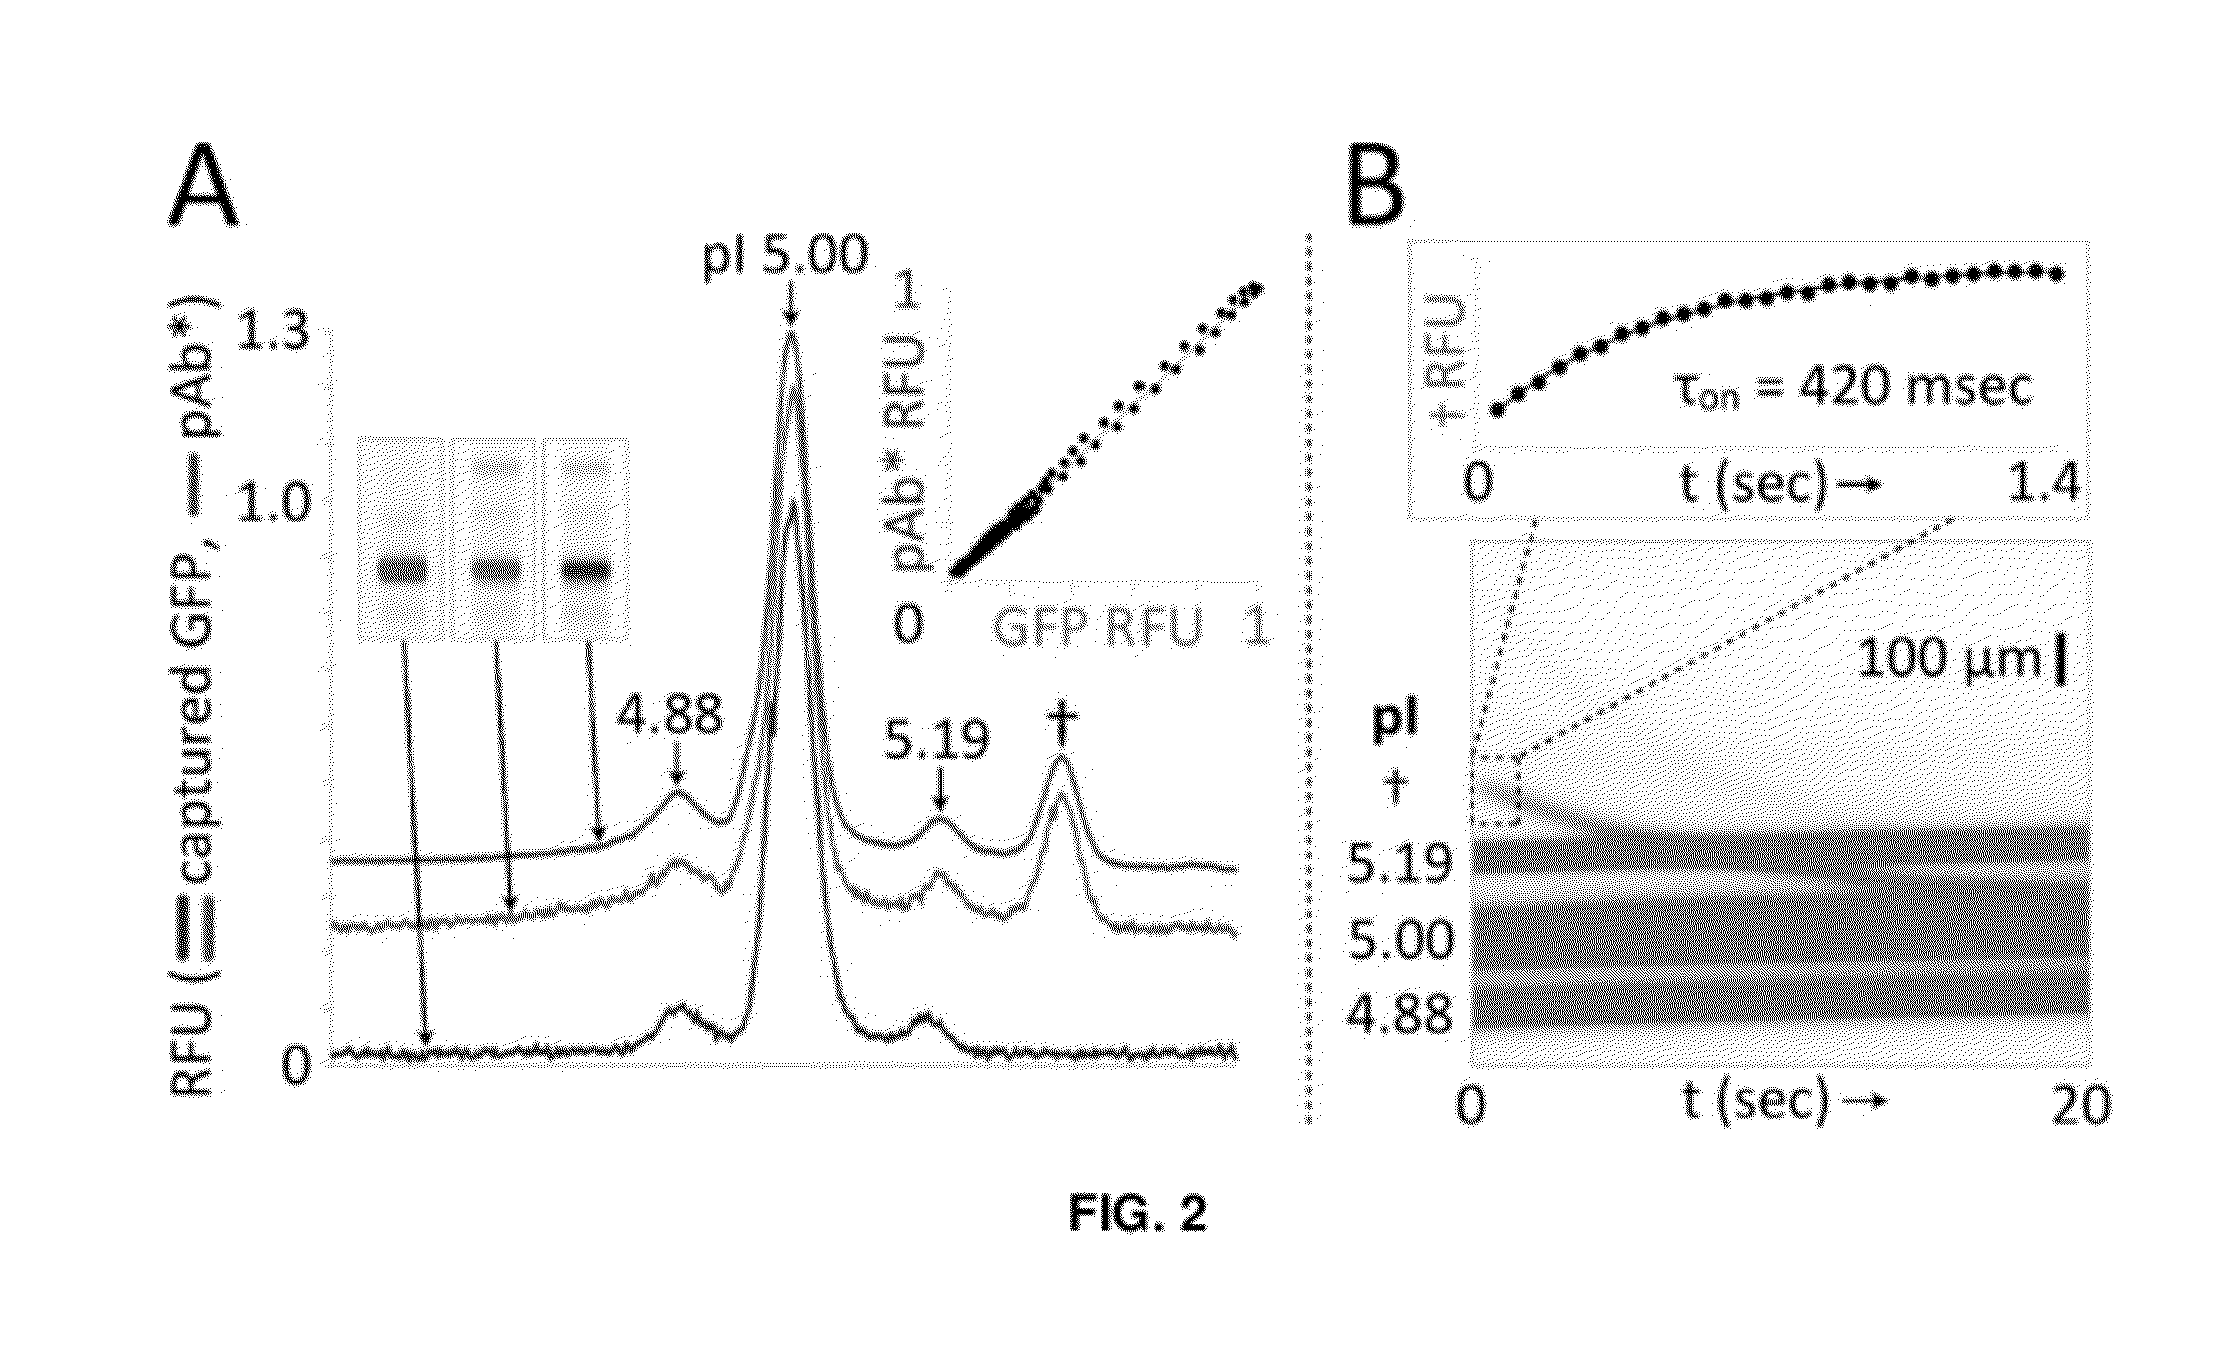 Microfluidic devices and methods for separating and detecting constituents in a fluid sample